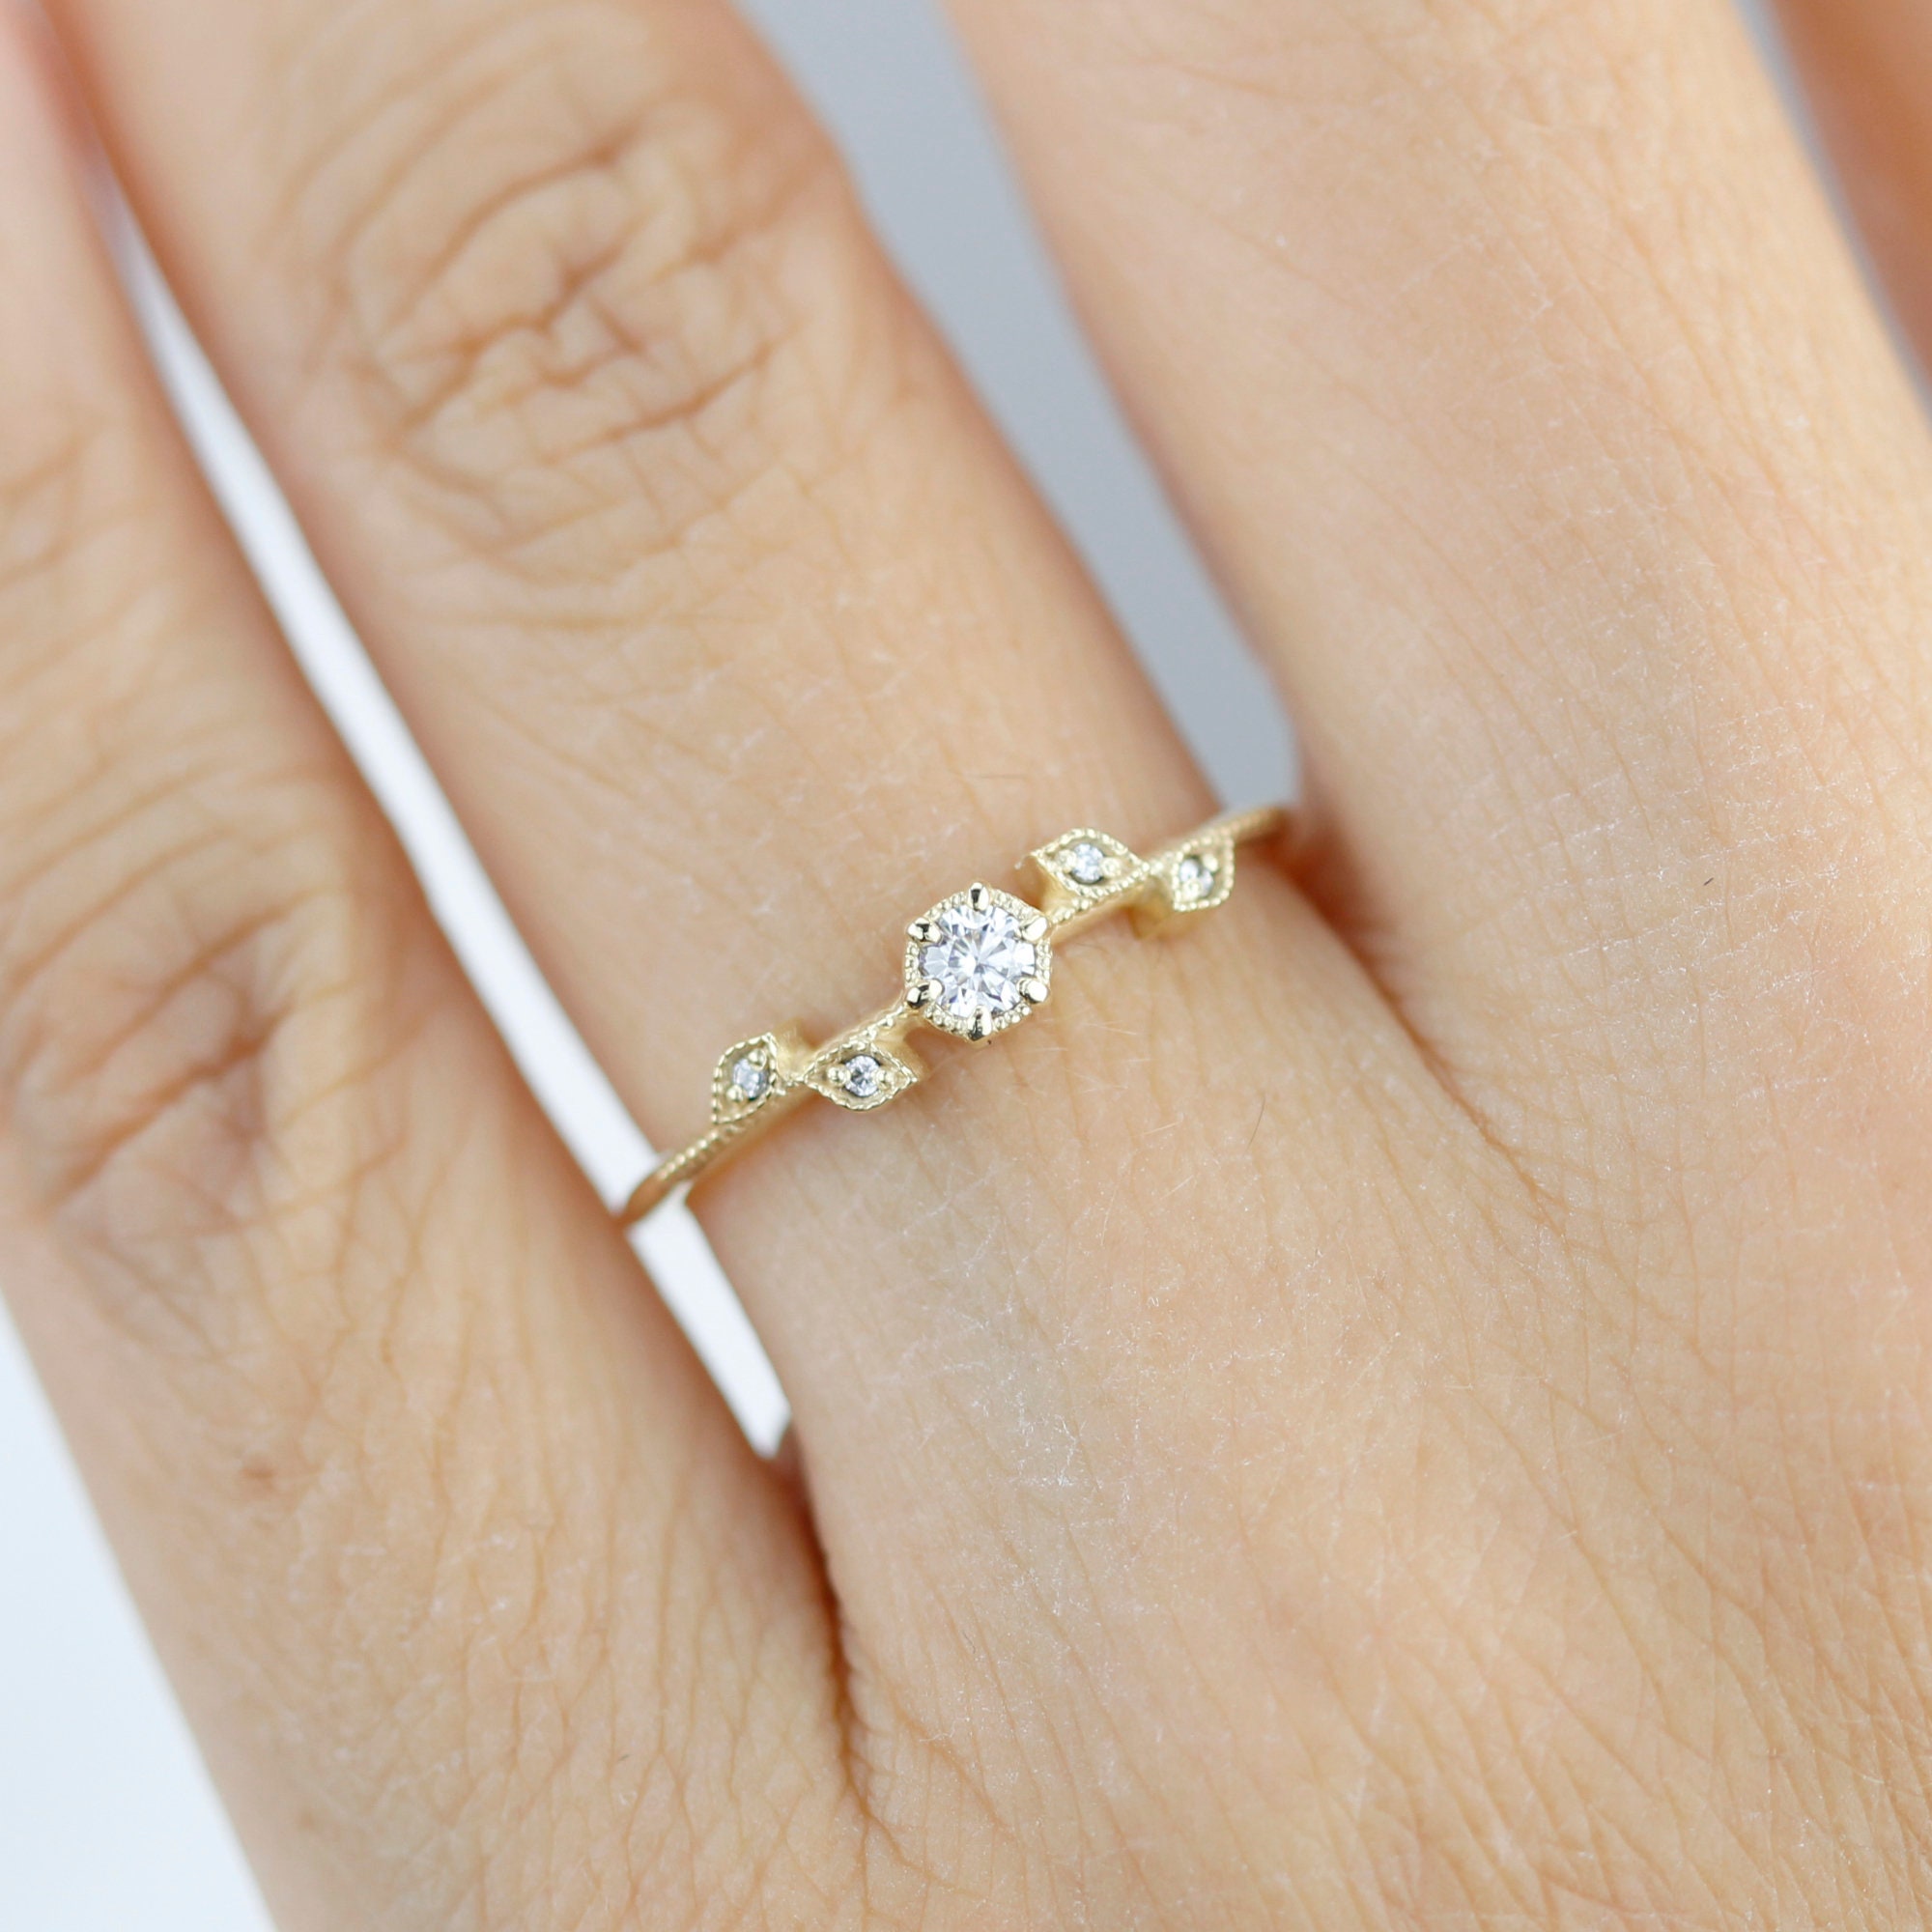 Simple Engagement Ring, Simple Diamond Ring, Leaf and Vine